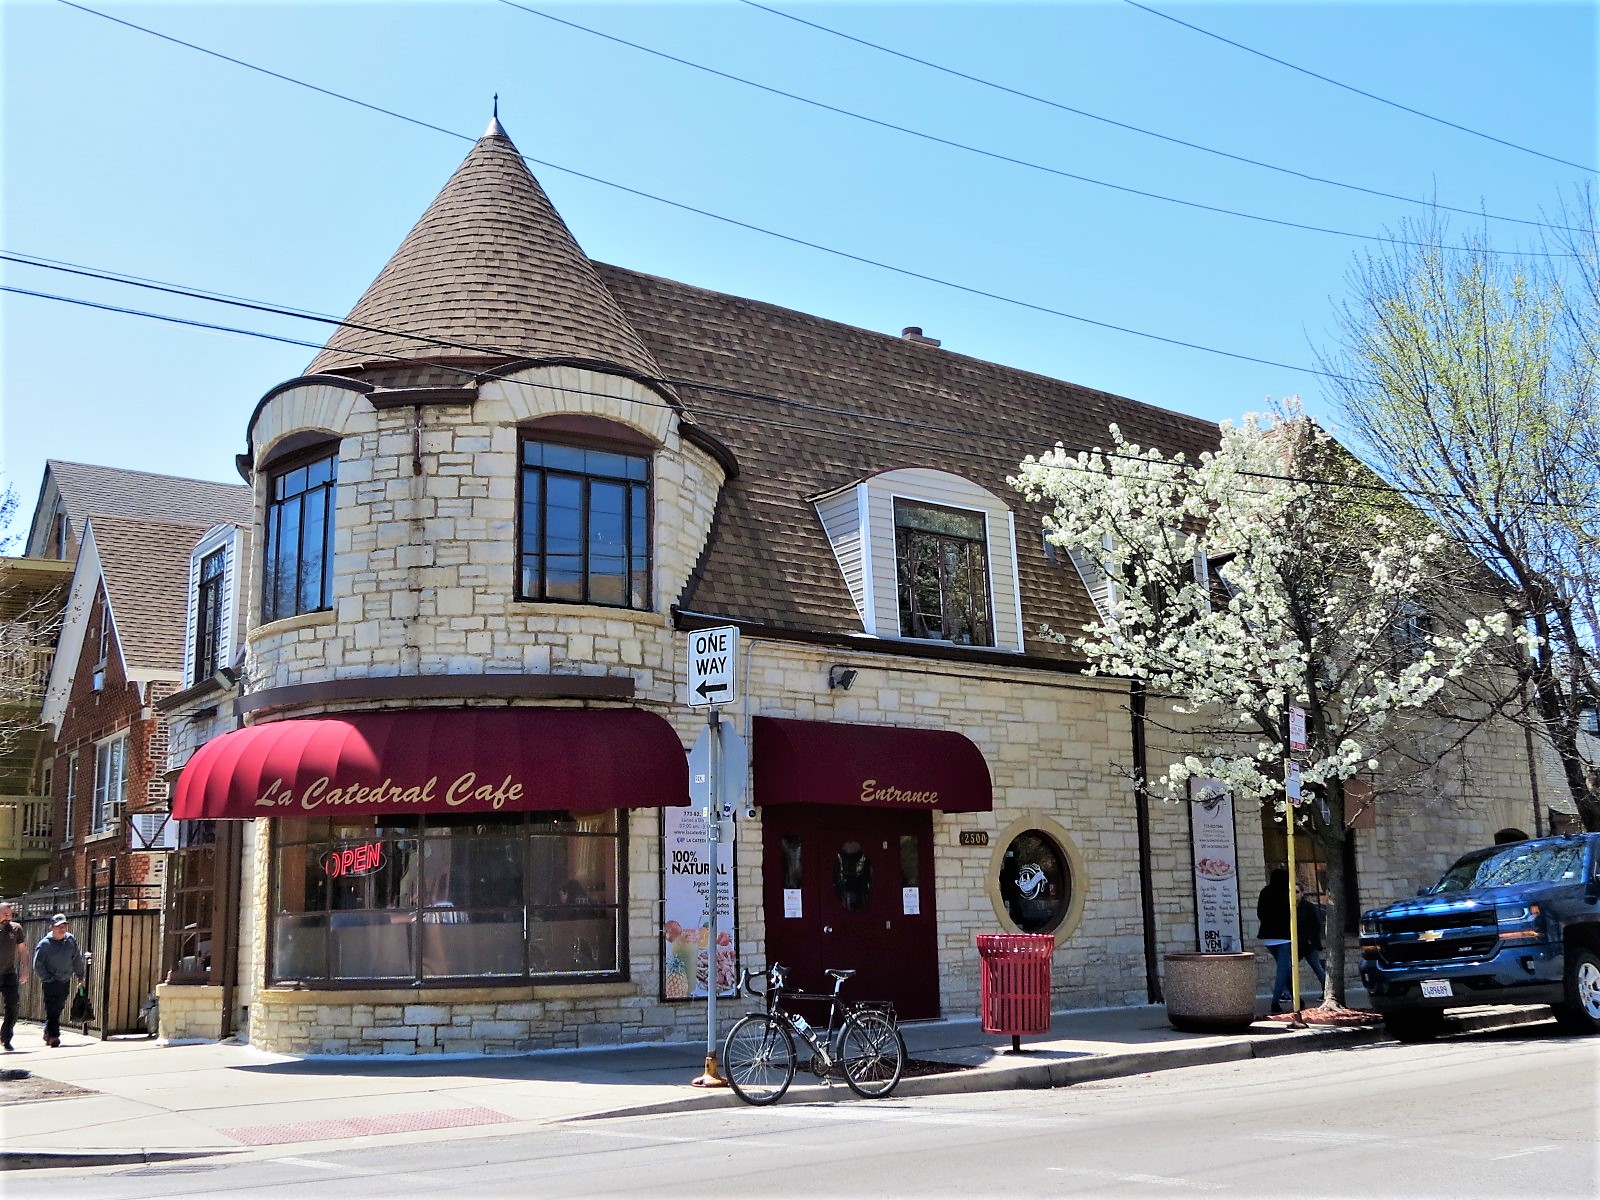 A tour bike standing at front of a stoner clad Tudor Revival corner building with cone capped turret and an ocular window on the side.